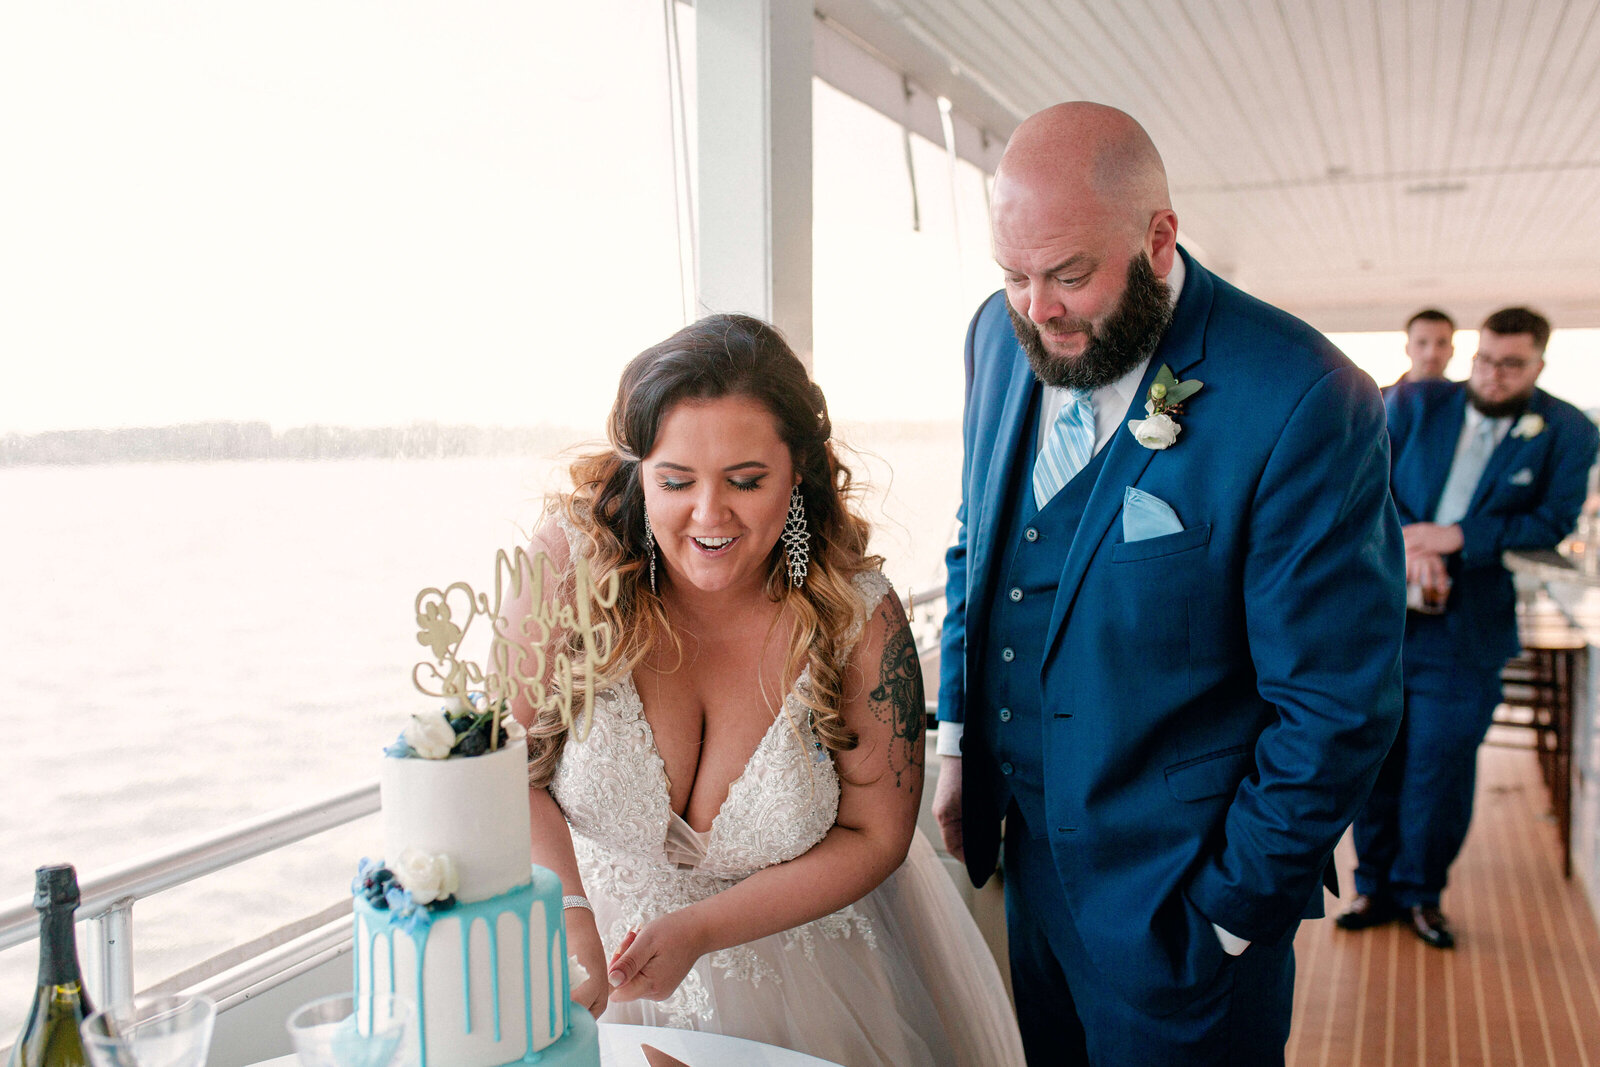 Virginia-Beach-Wedding-Planners-Sincerely-Jane-Events-8797